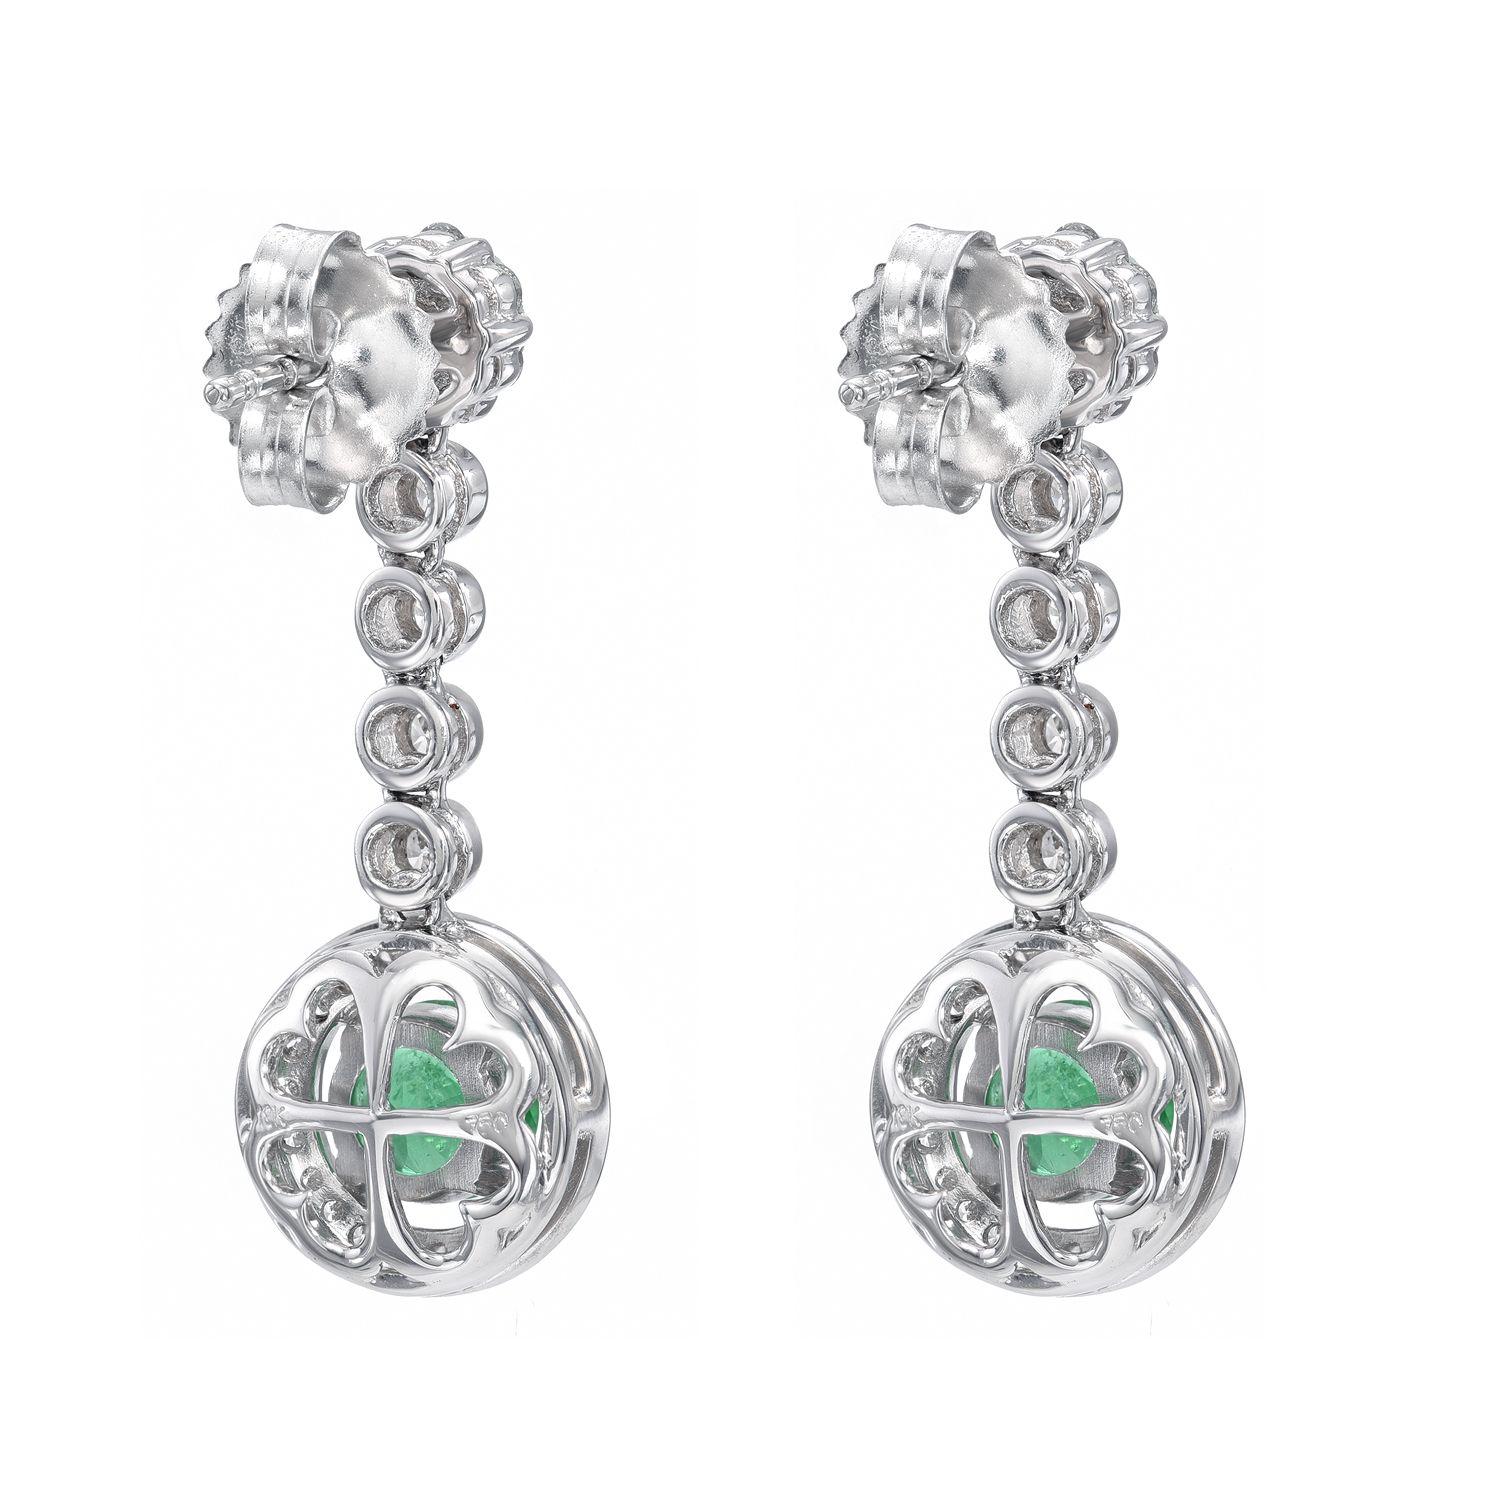 18K white gold earrings, featuring a pair of round Emeralds weighing a total of 0.98 carats, adorned by diamonds weighing a total of 0.70 carats.
Approximately 1 inch in length.
Returns are accepted and paid by us within 7 days of delivery.

Emerald